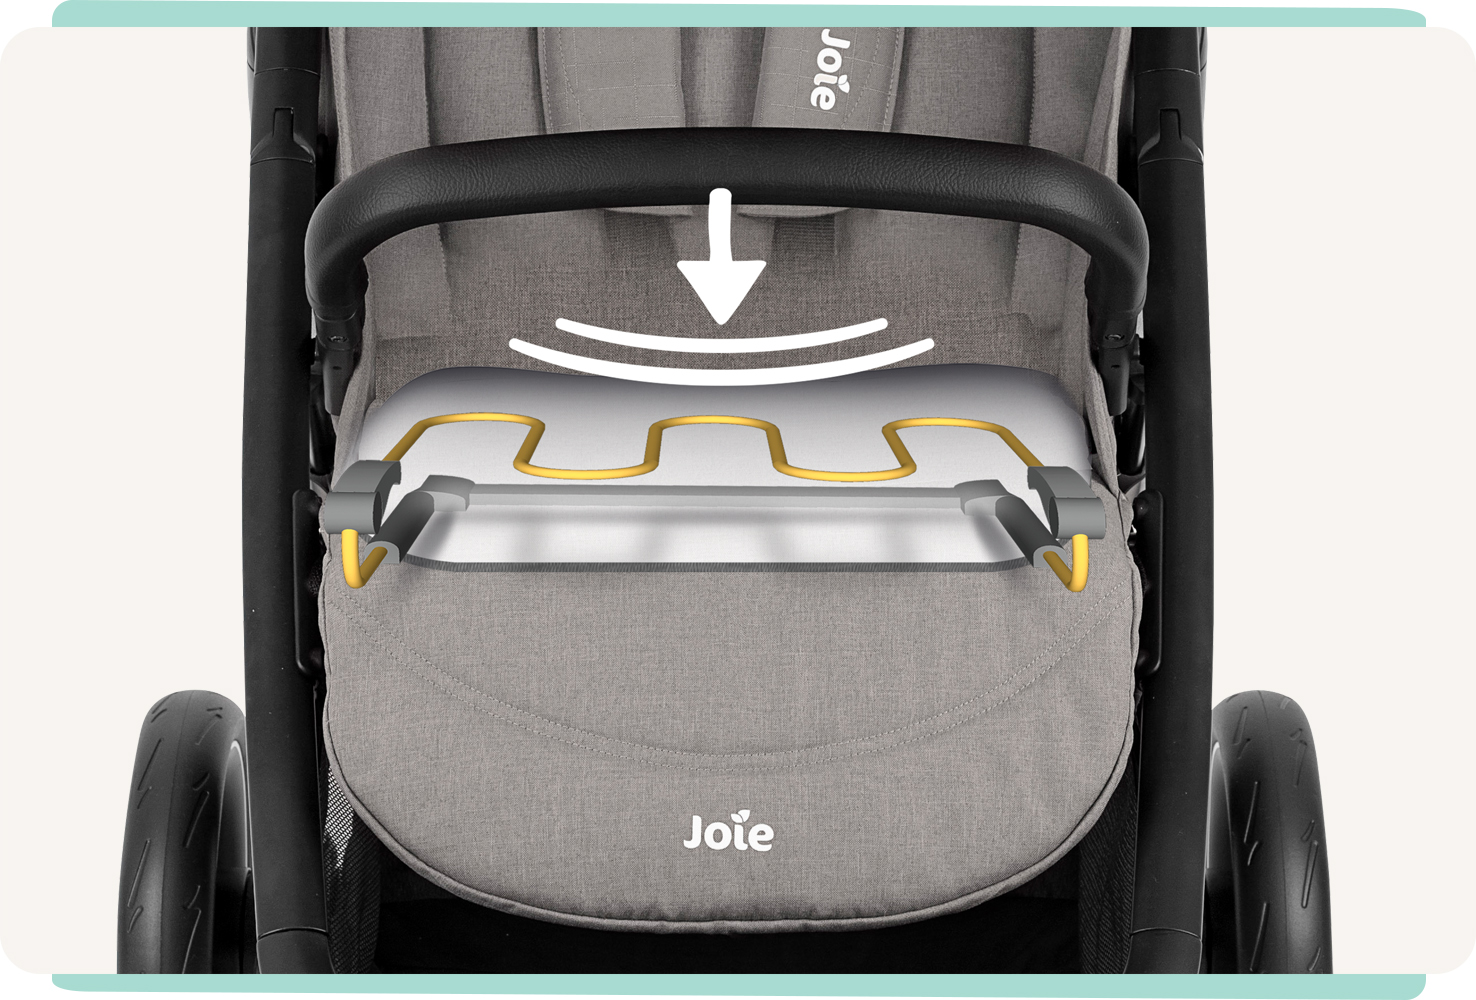 Joie litetrax pro stroller in gray close-up of seat with animation of flex spring. 